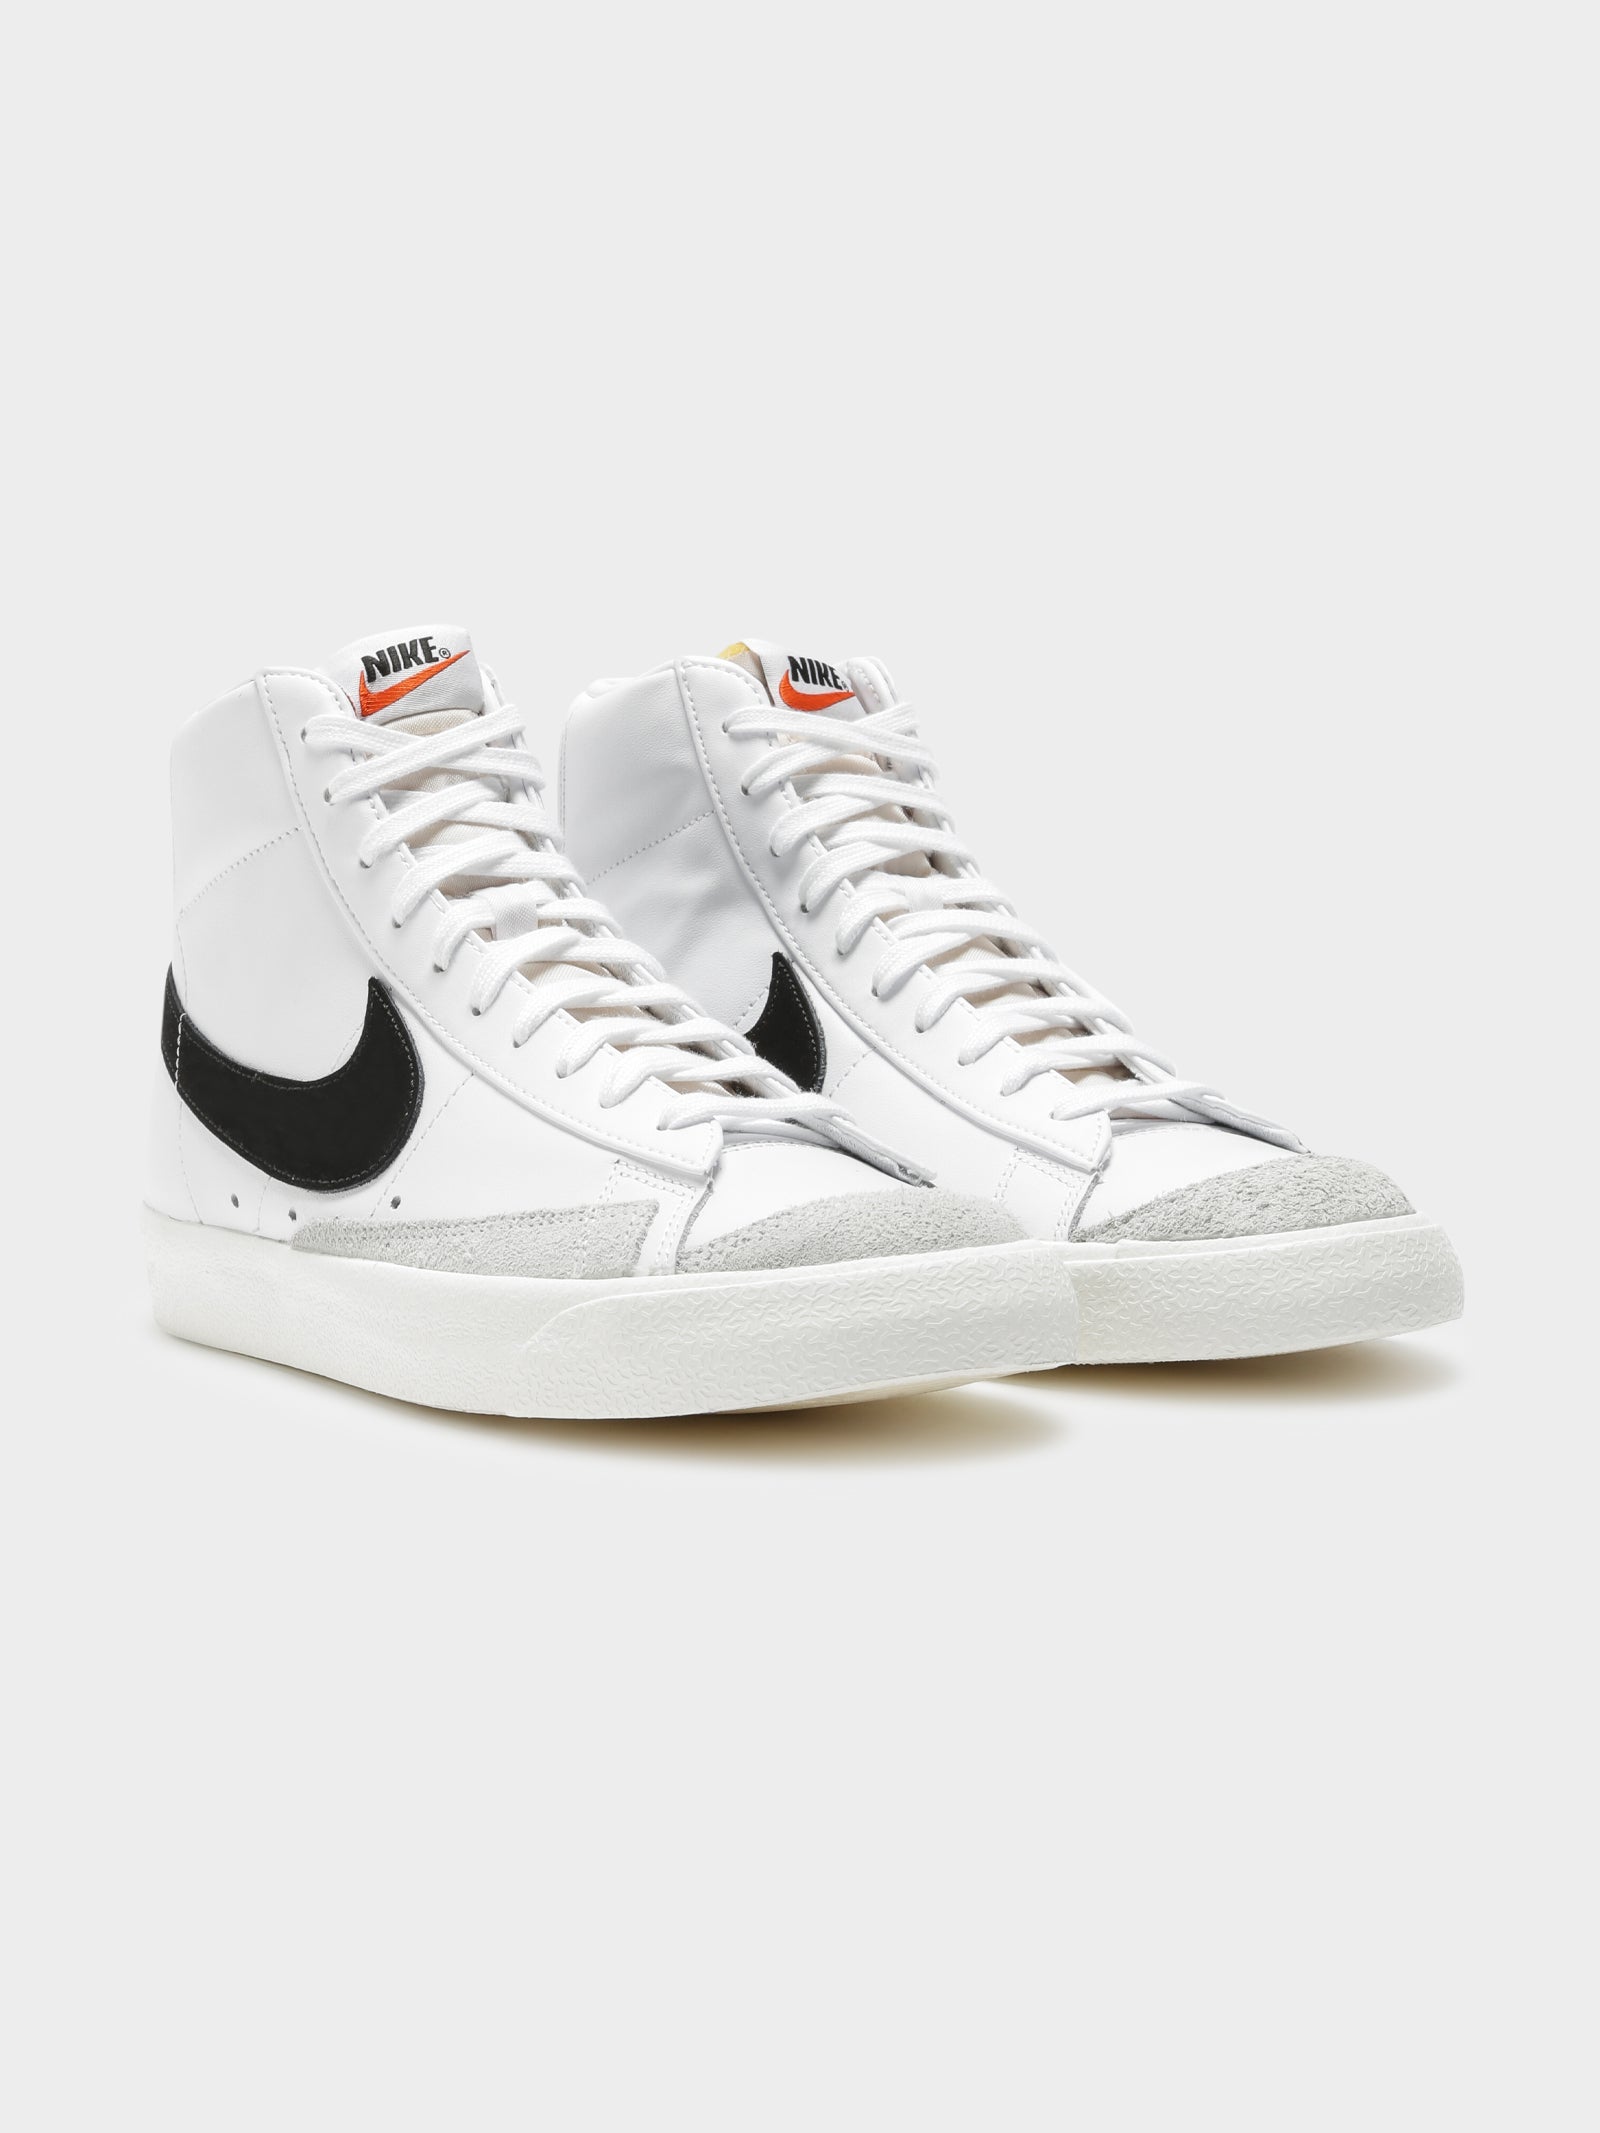 Womens Blazer Mid 77 High Top Sneakers in Black & White - Glue Store